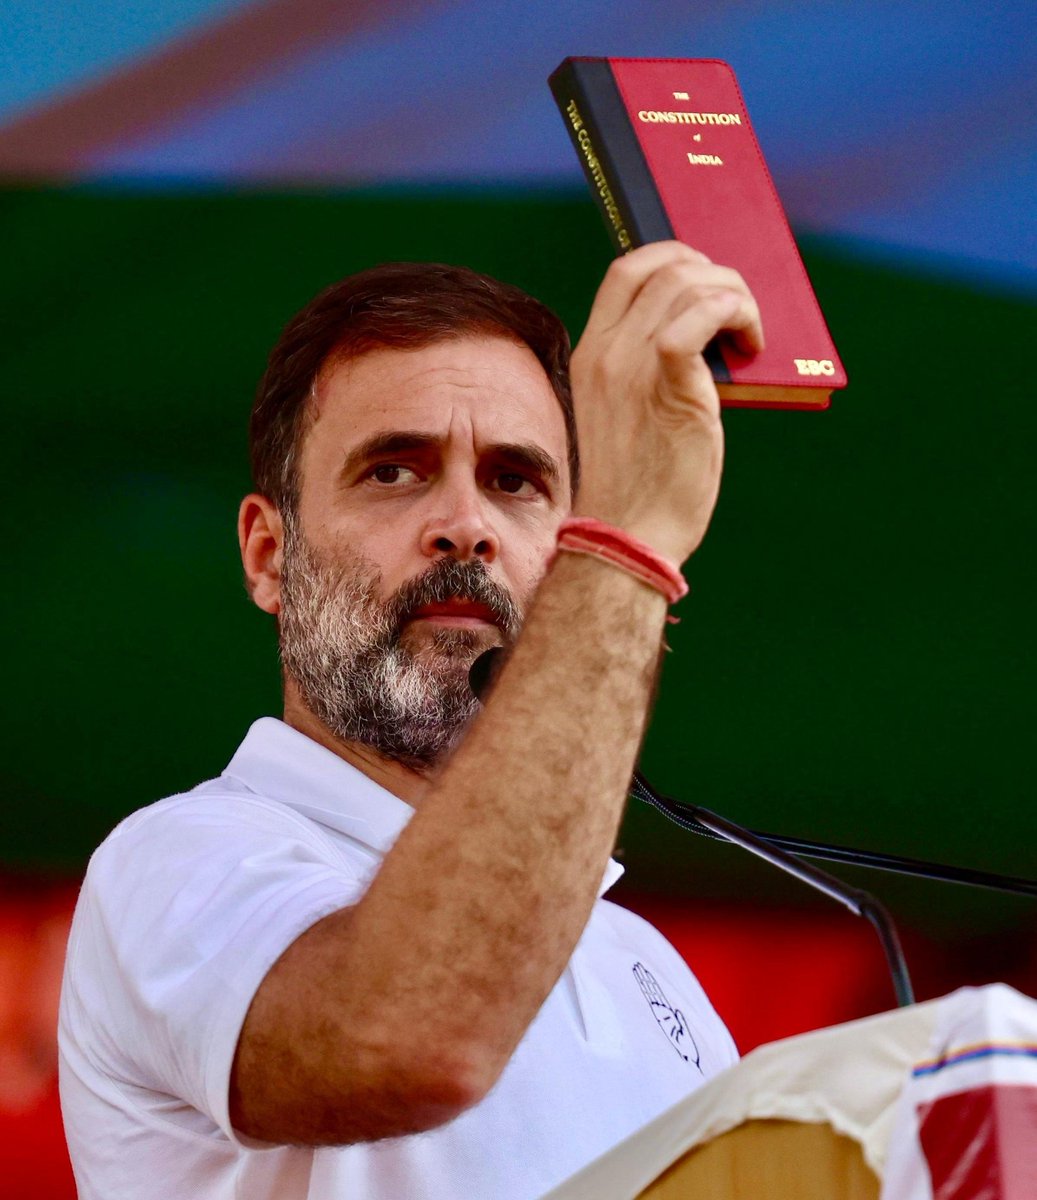 Rahul Gandhi in Loksabha 2024 — - 107 rallies ⚡ - 25+ roadshows ⚡ - 15+ interactive sessions ⚡ - 10+ Press Conferences ⚡ - Destroyed Modi Chamchi Gang ⚡ - Turned Modi into his pét ⚡ He also emerged as the most powerful speaker & the biggest mass leader of India. Not to